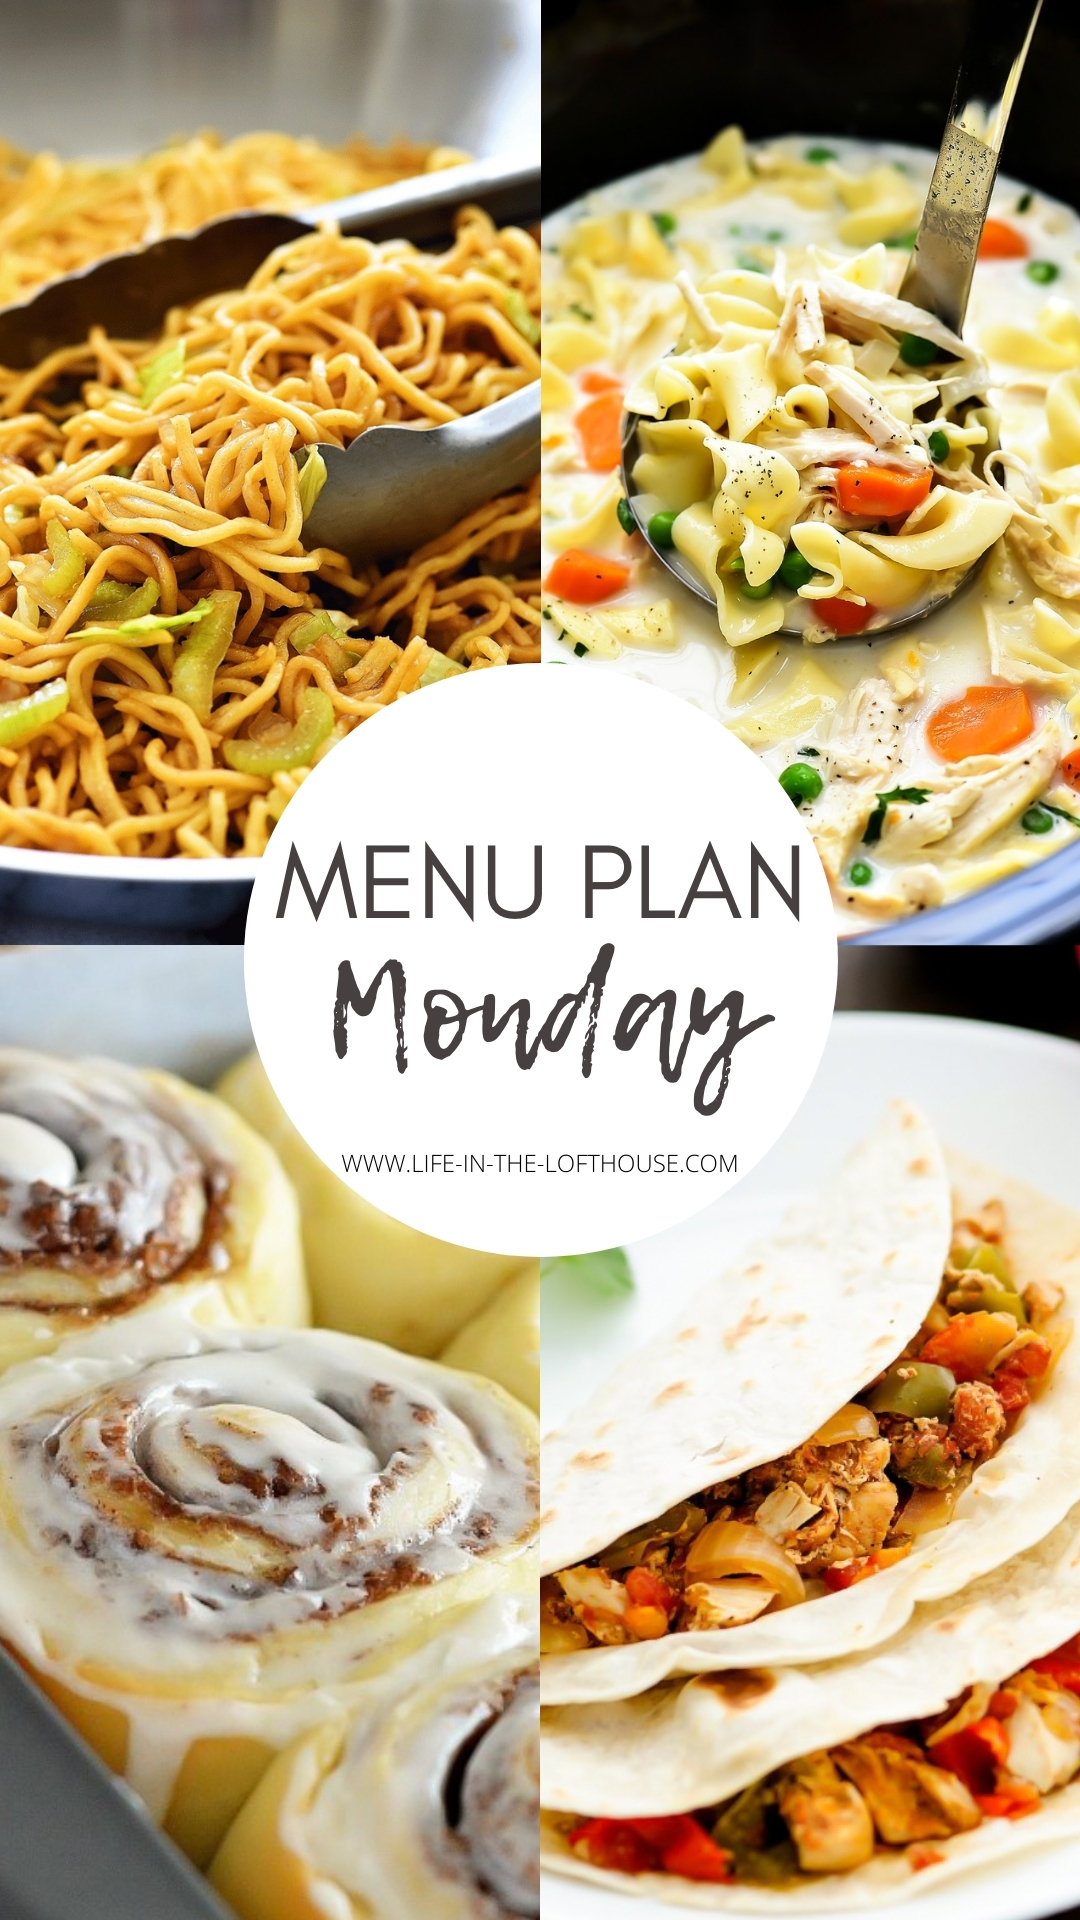 Menu Plan Monday is a weekly menu with delicious dinner recipes. All of the recipes are easy to follow and great for busy weeknights